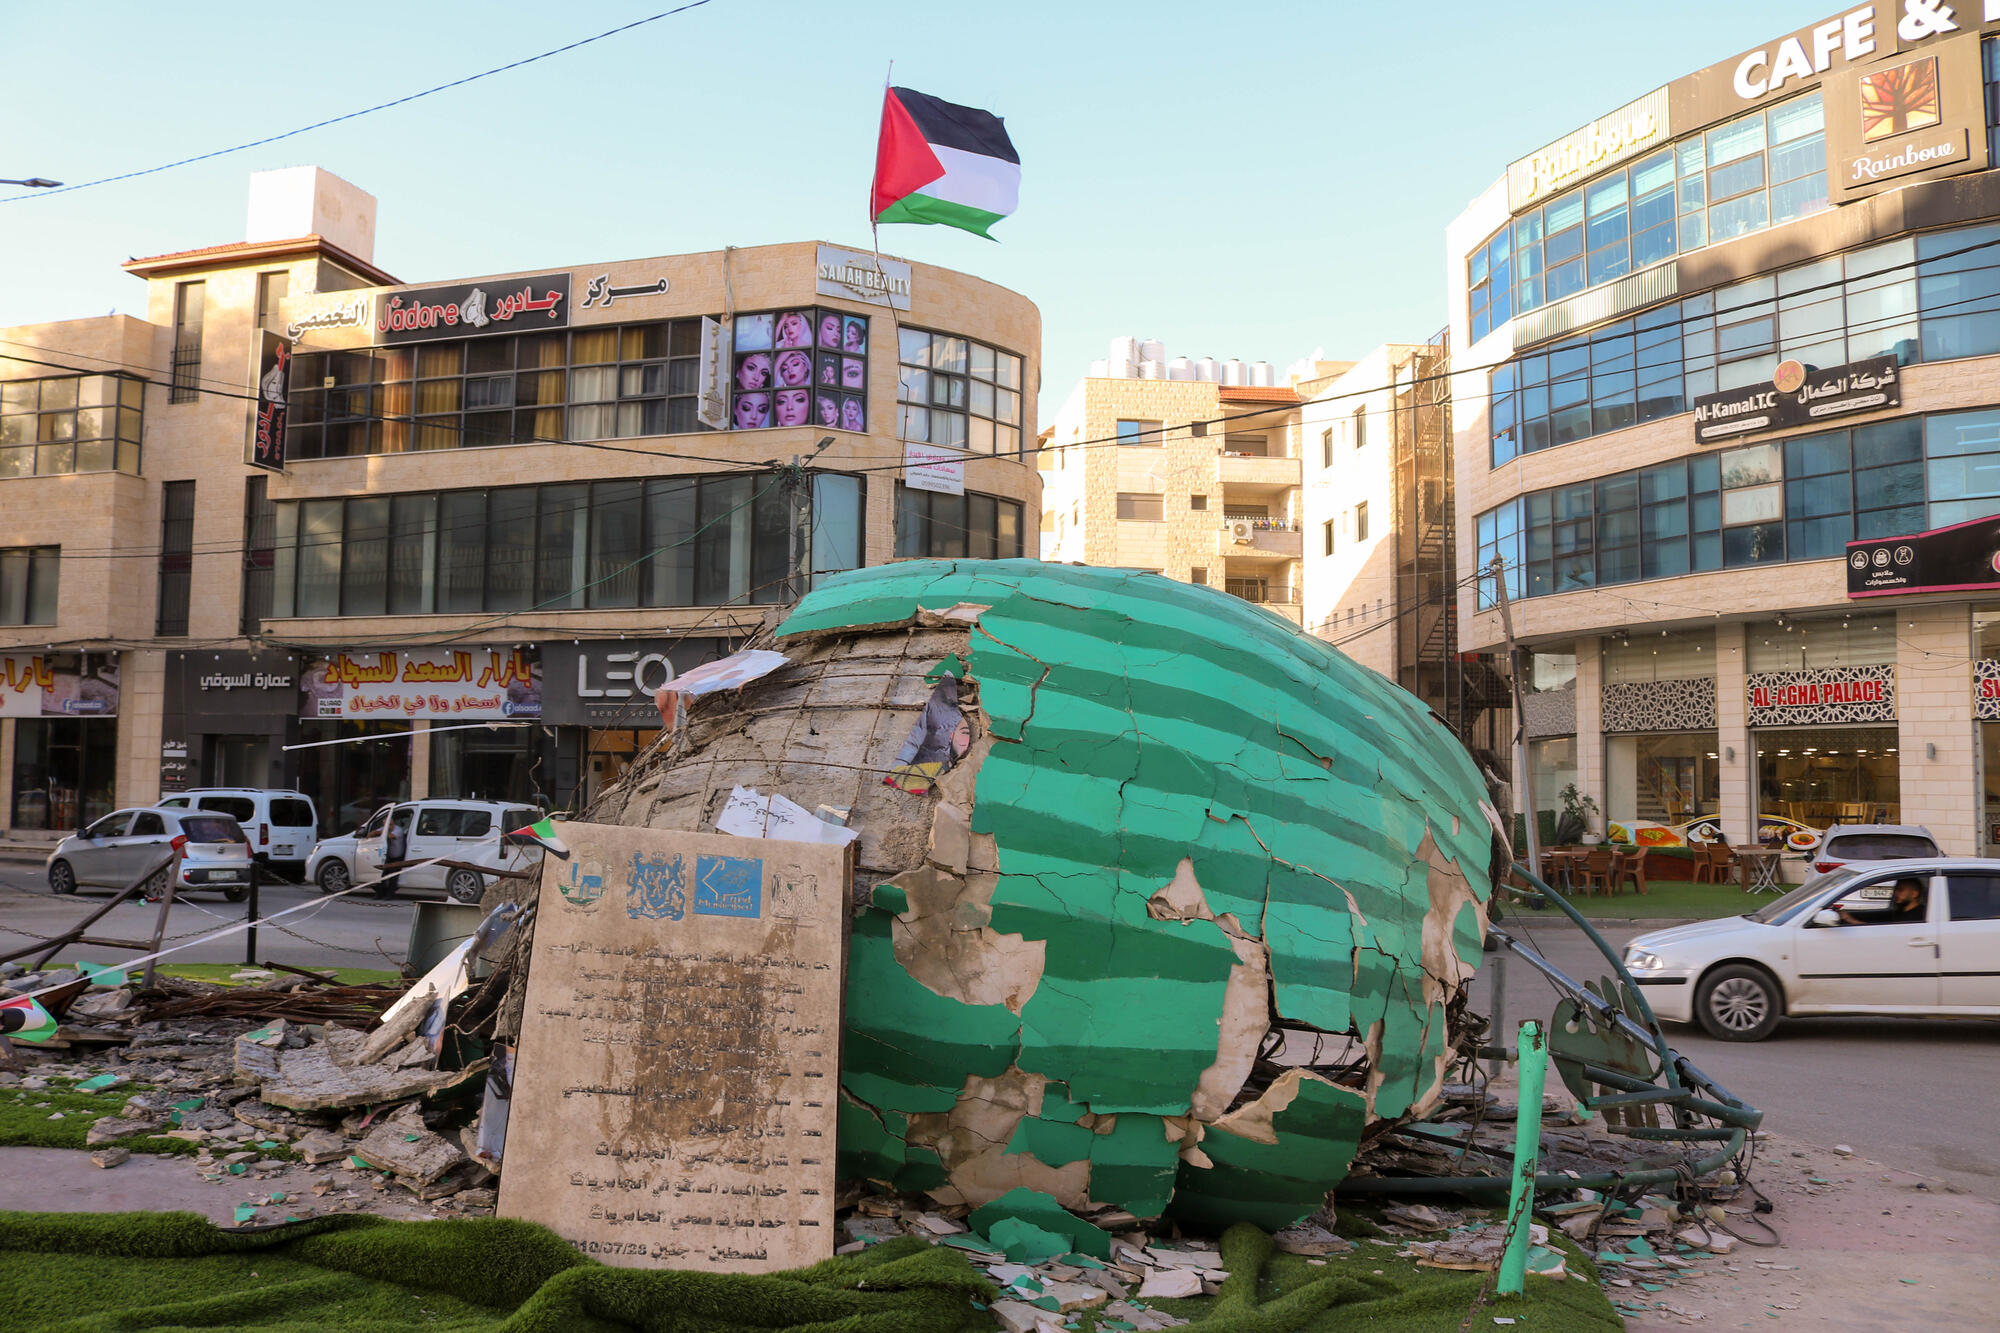 The watermelon roundabout, a symbol of Palestinian pride in Jenin, was destroyed during a military incursion in the city. Violent Israeli incursions in Jenin have become commonplace since 7 October. © FARIS AL-JAWAD/MSF